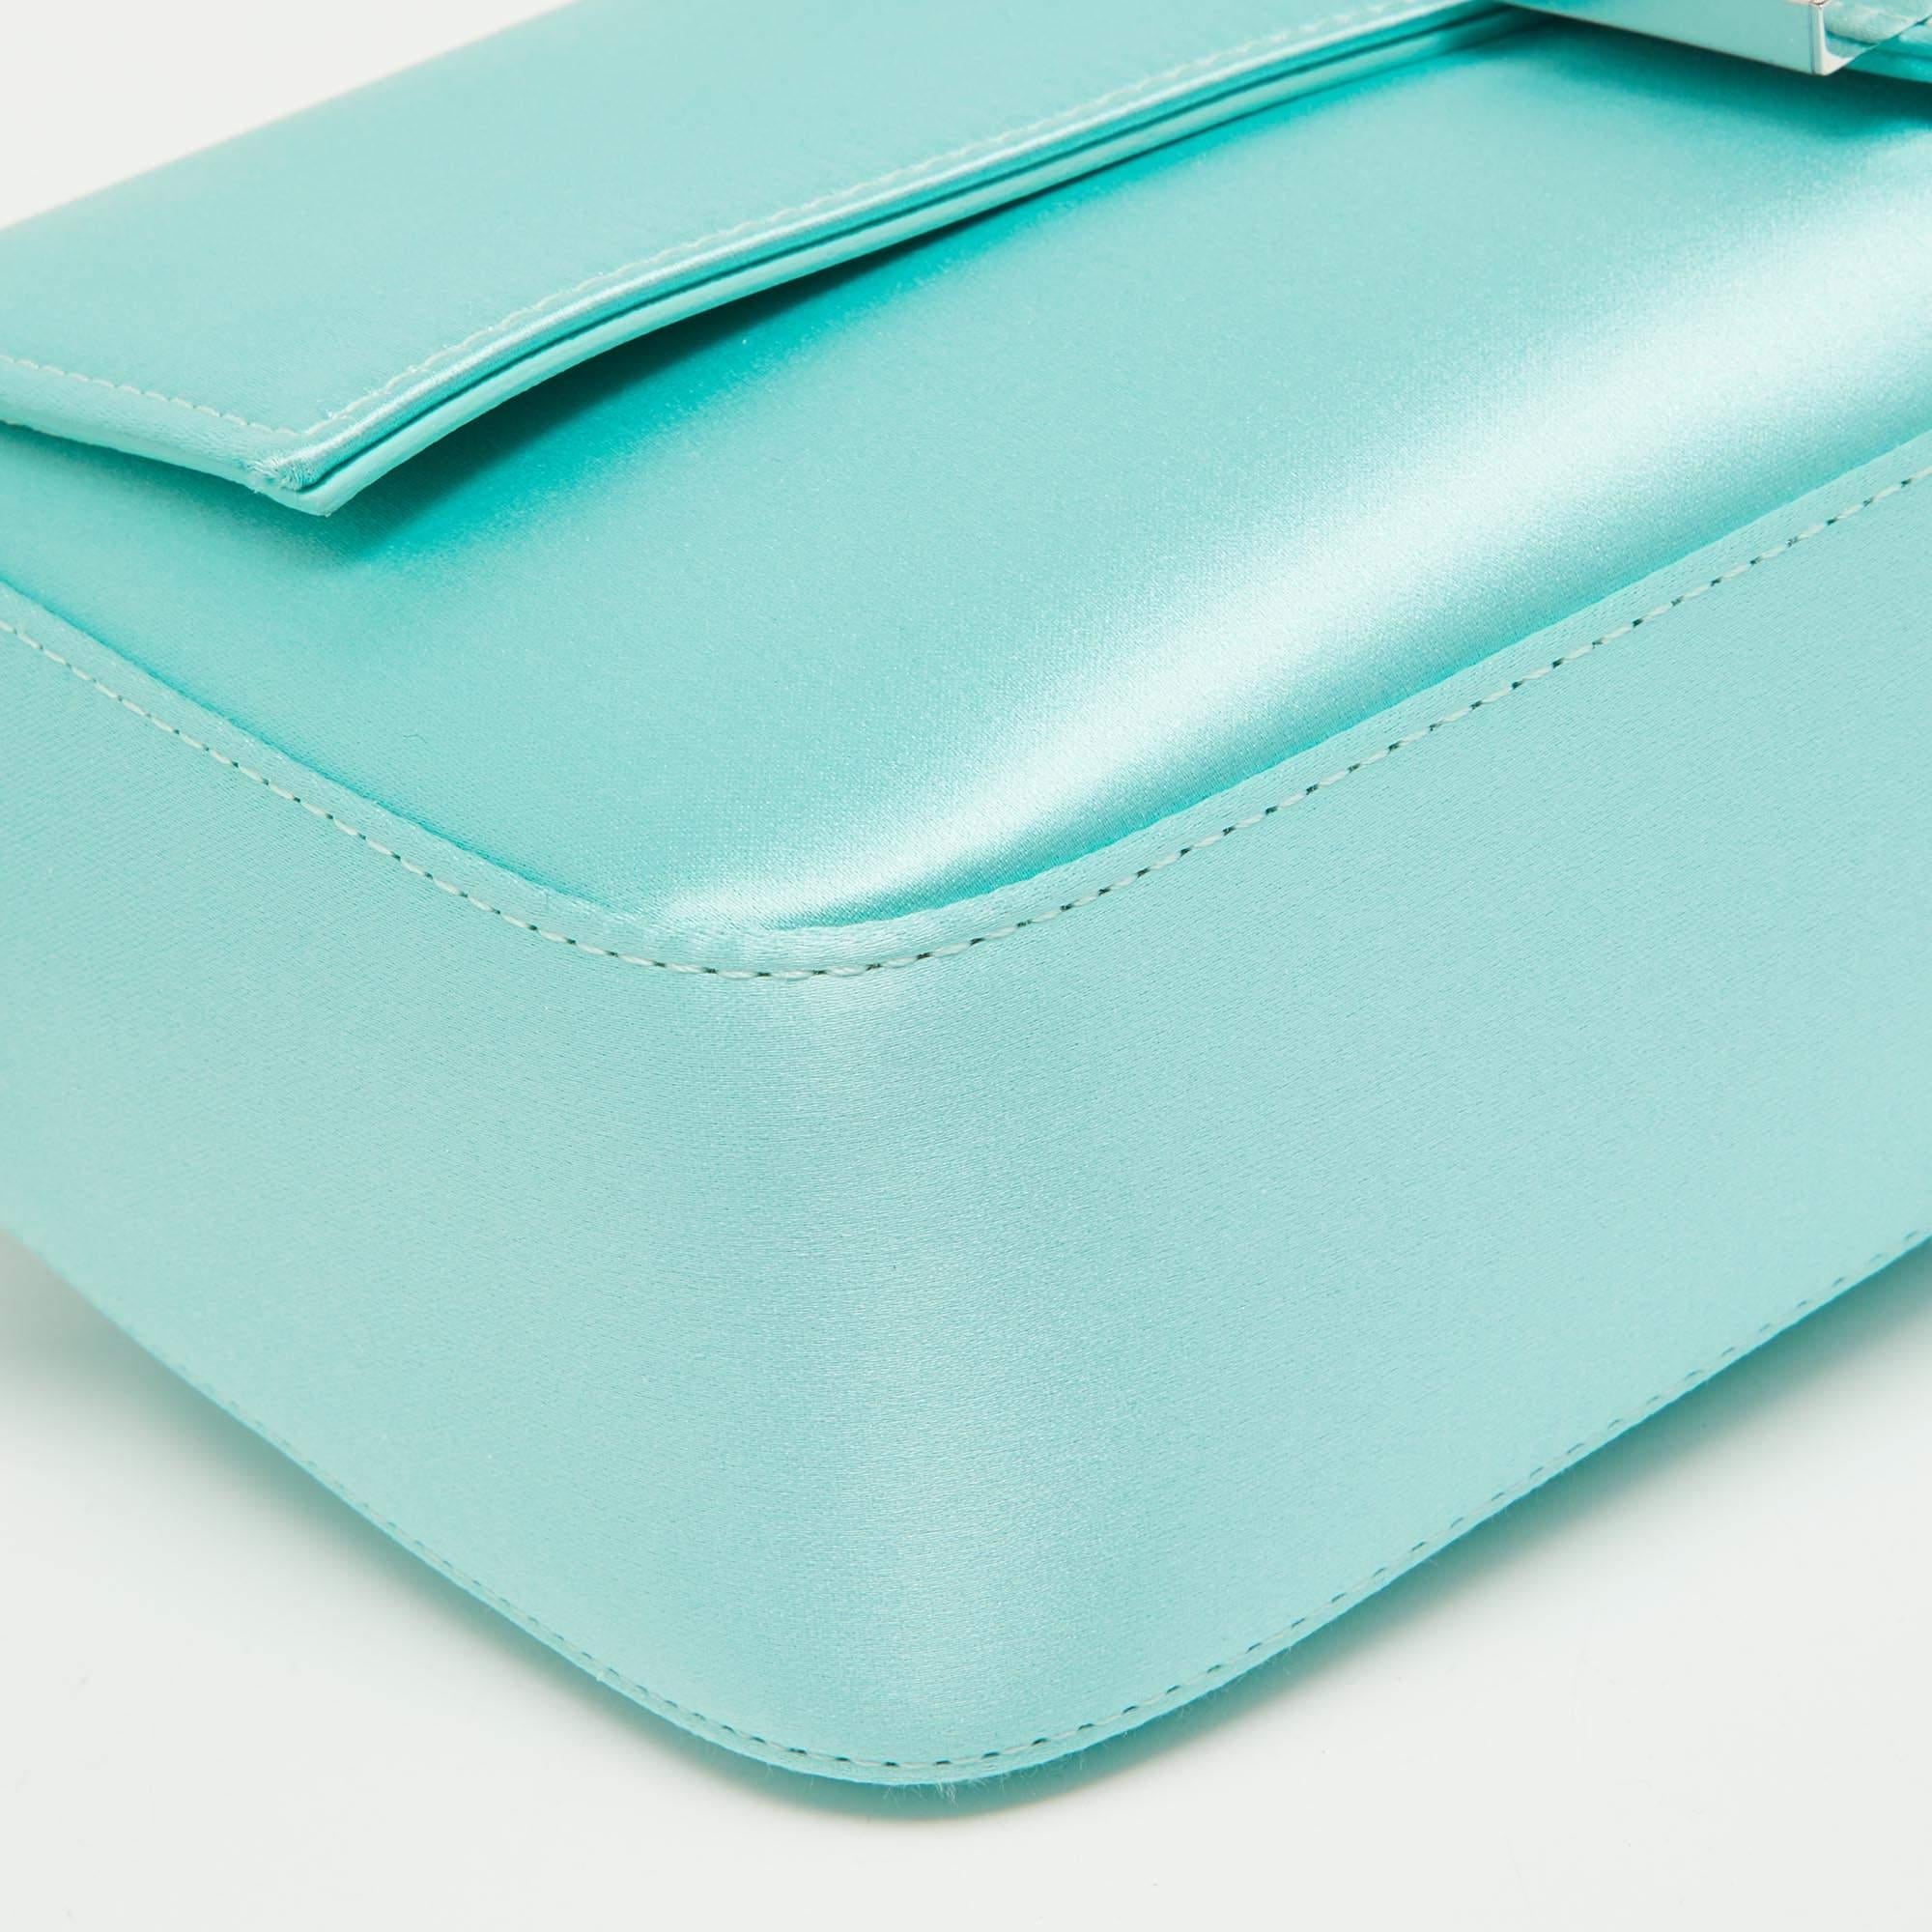 The Fendi x Tiffany & Co. Baguette Flap Bag exudes luxury with its collaboration of iconic brands. Crafted in sumptuous Tiffany Blue satin, it features a classic Baguette silhouette with Fendi's signature FF motif. The bag seamlessly blends timeless